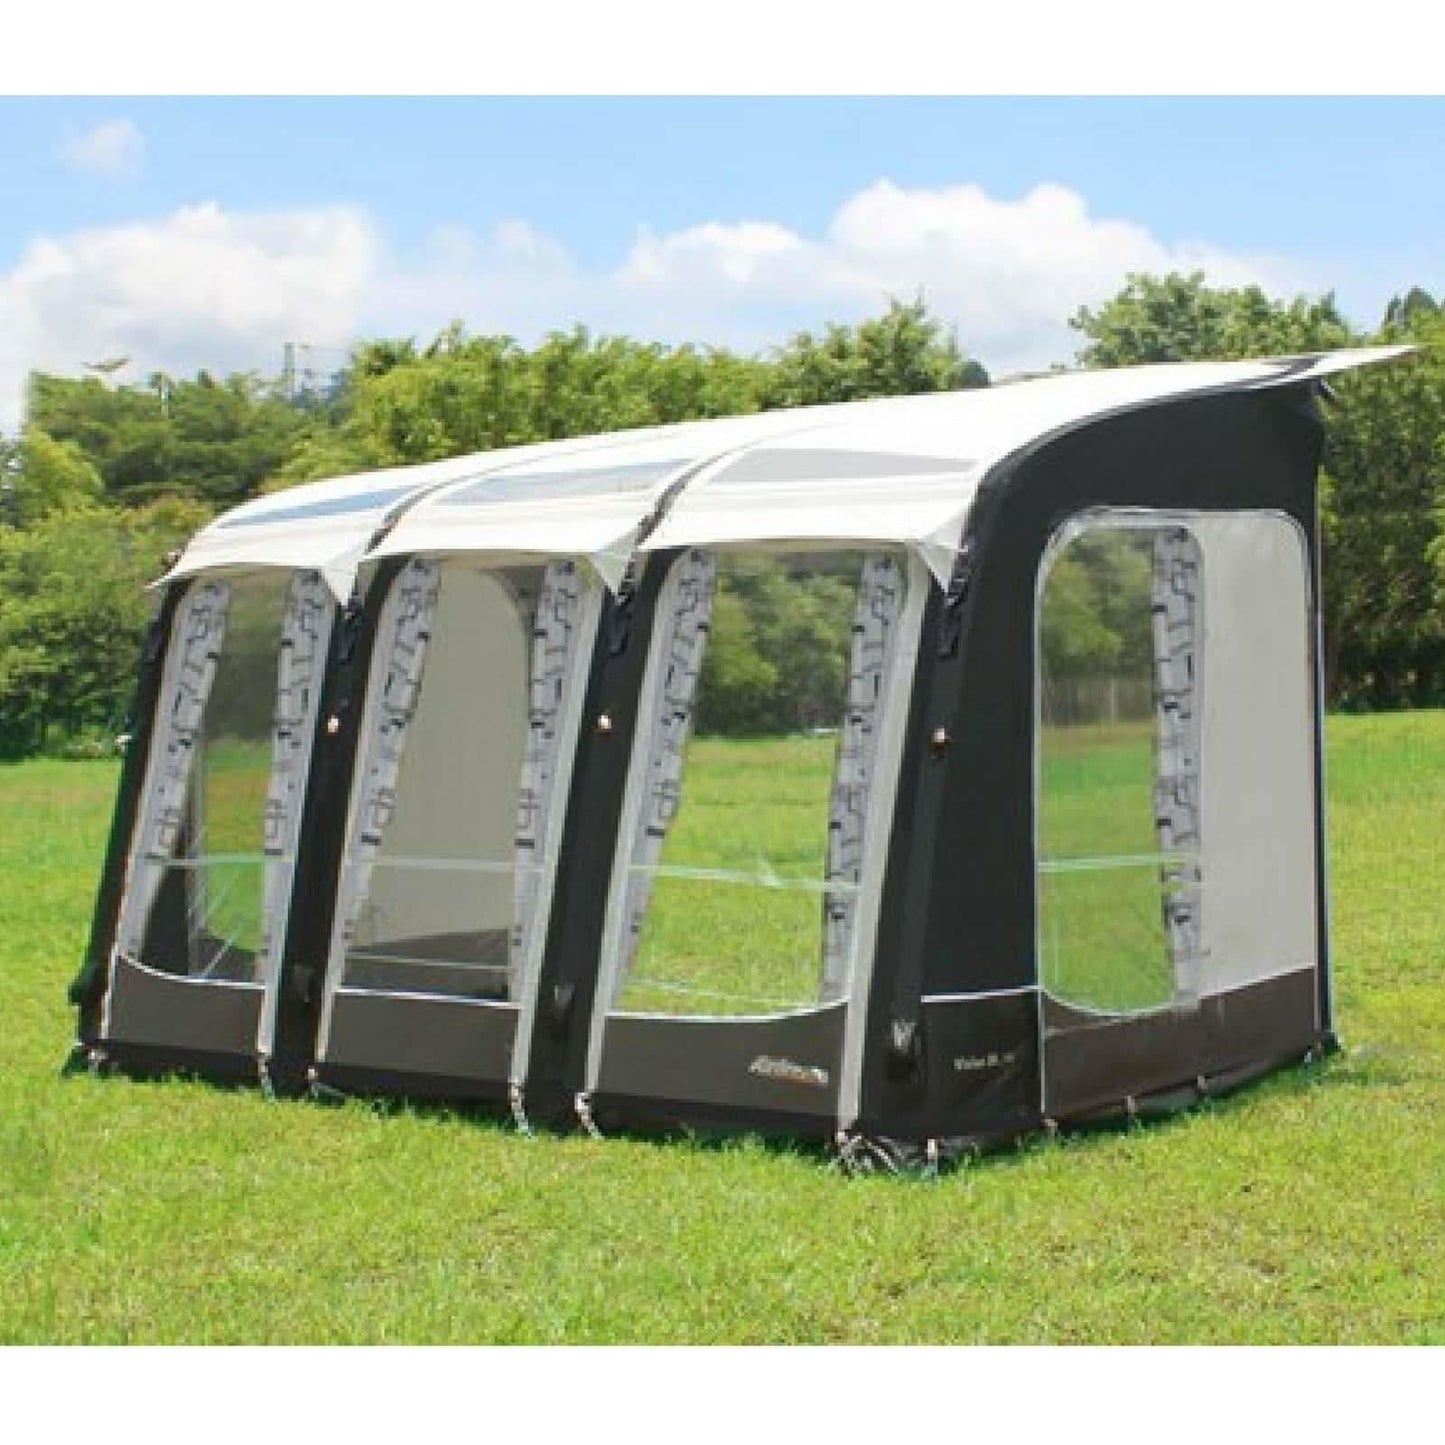 Camptech AirDream Vision DL 300 Inflatable Air Porch Caravan Awning + Free Straps 2019 made by CampTech. A Air Awning sold by Quality Caravan Awnings